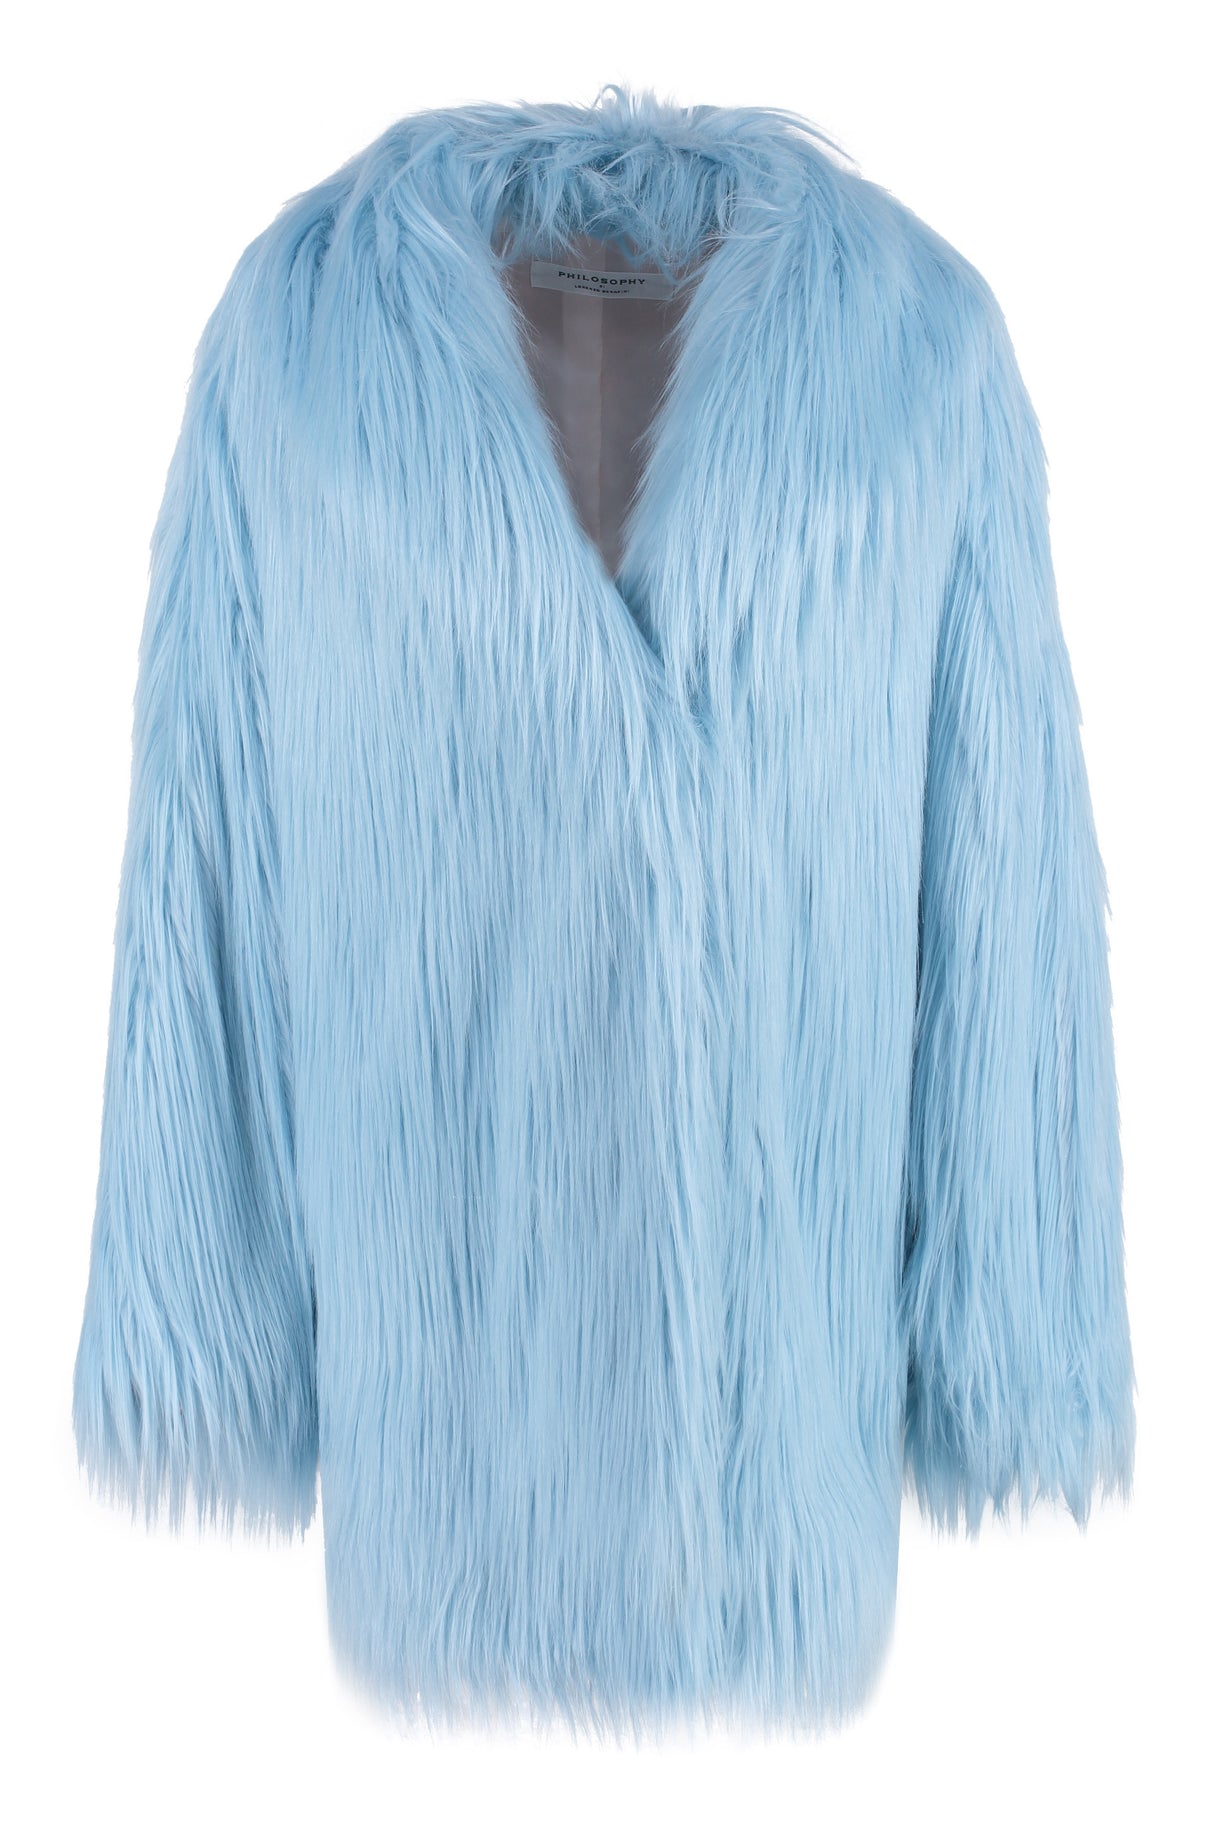 Oversized Blue Faux Fur Jacket - FW22 Collection